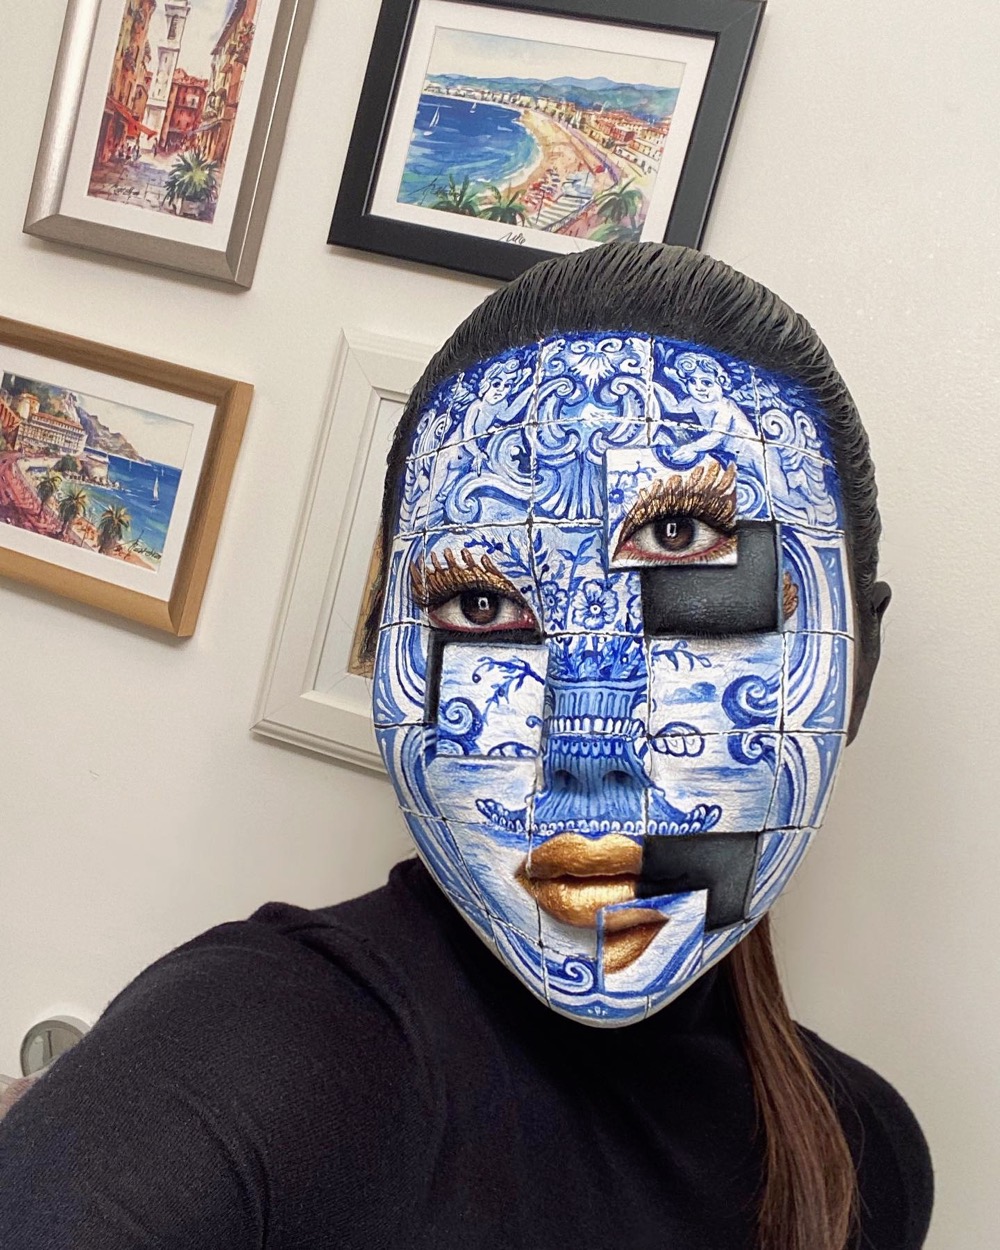 elaborate face makeup that makes it look like a woman's face is made of blocks